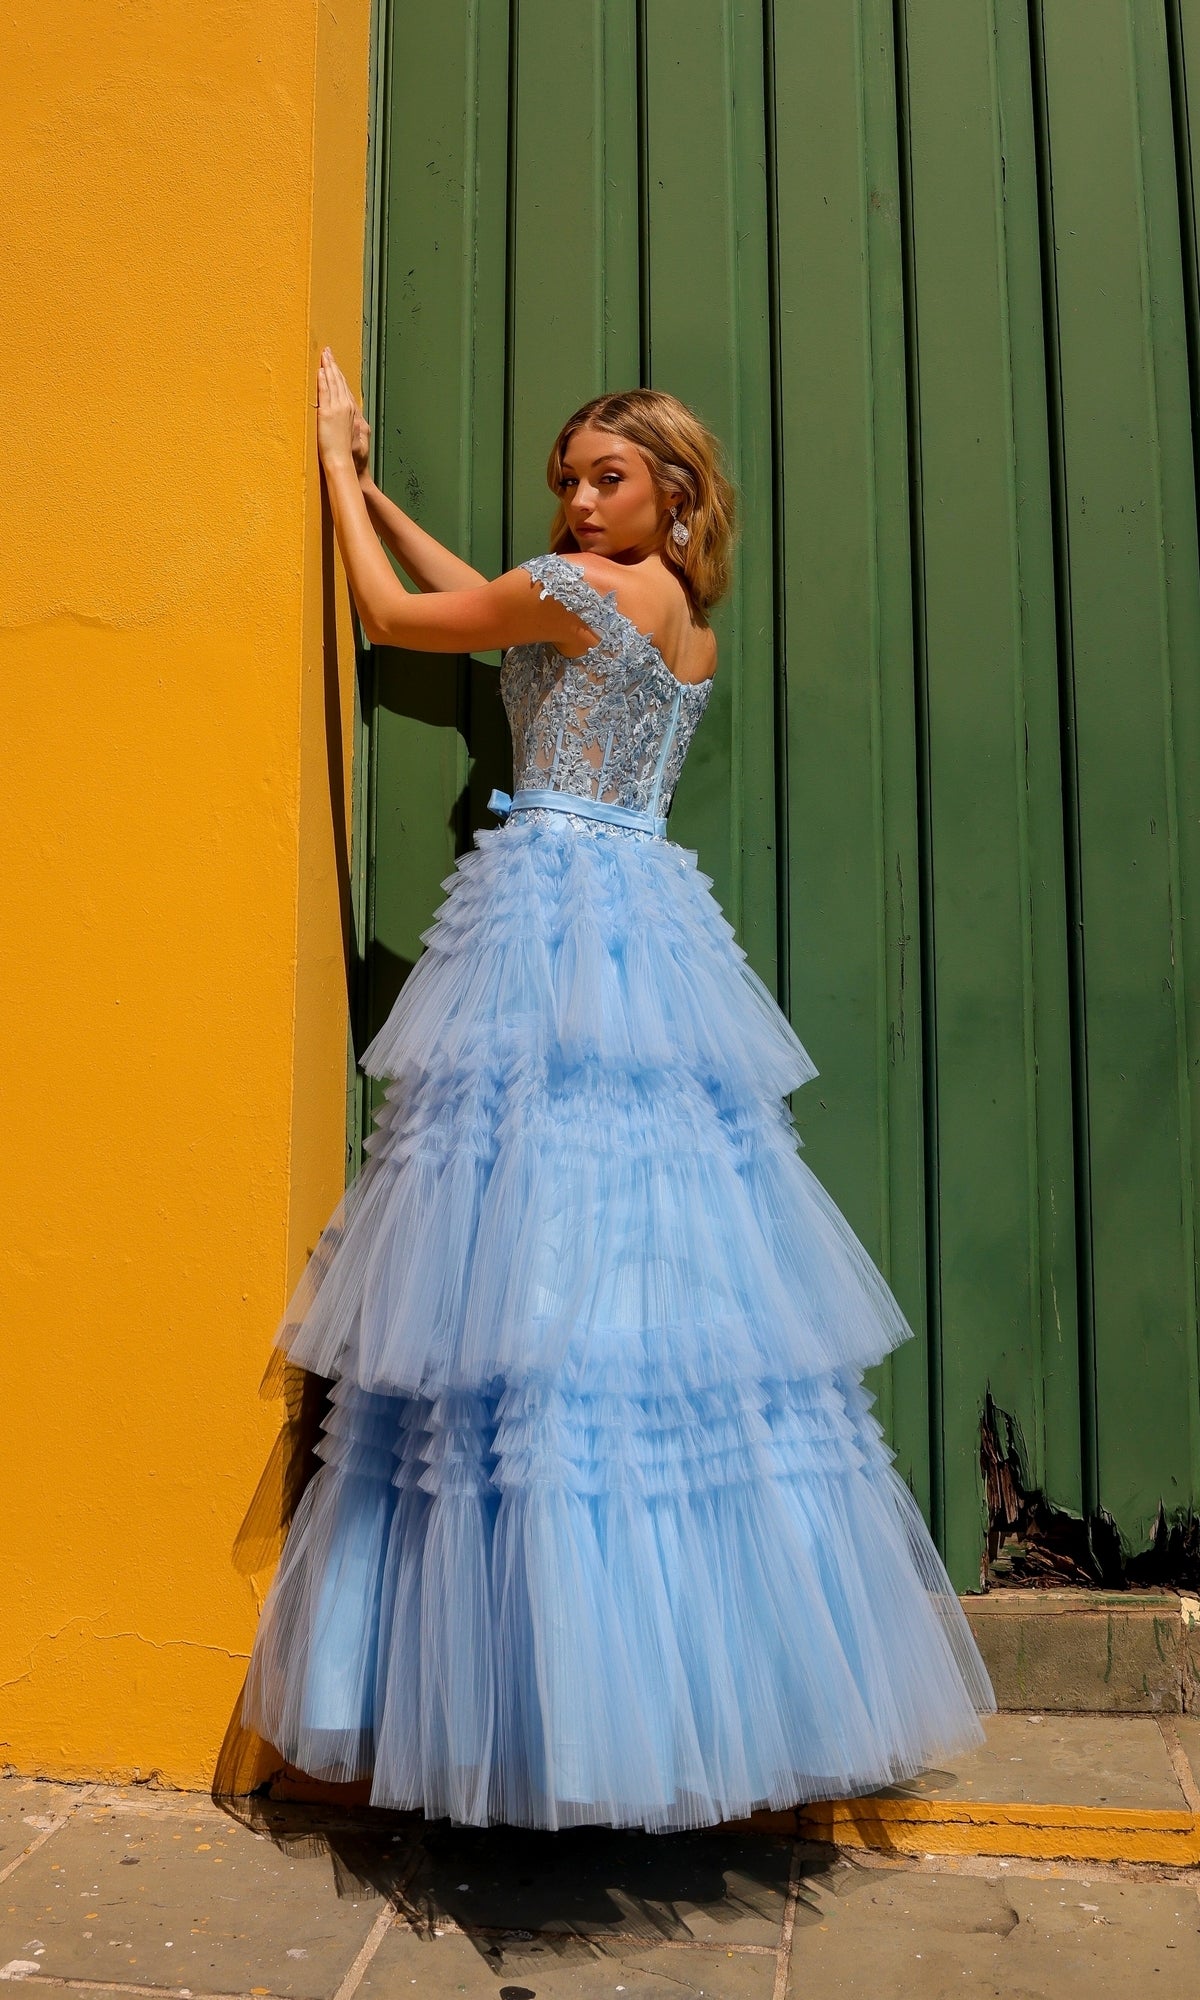 Nox Anabel Designer Ruffled Prom Ball Gown E1293